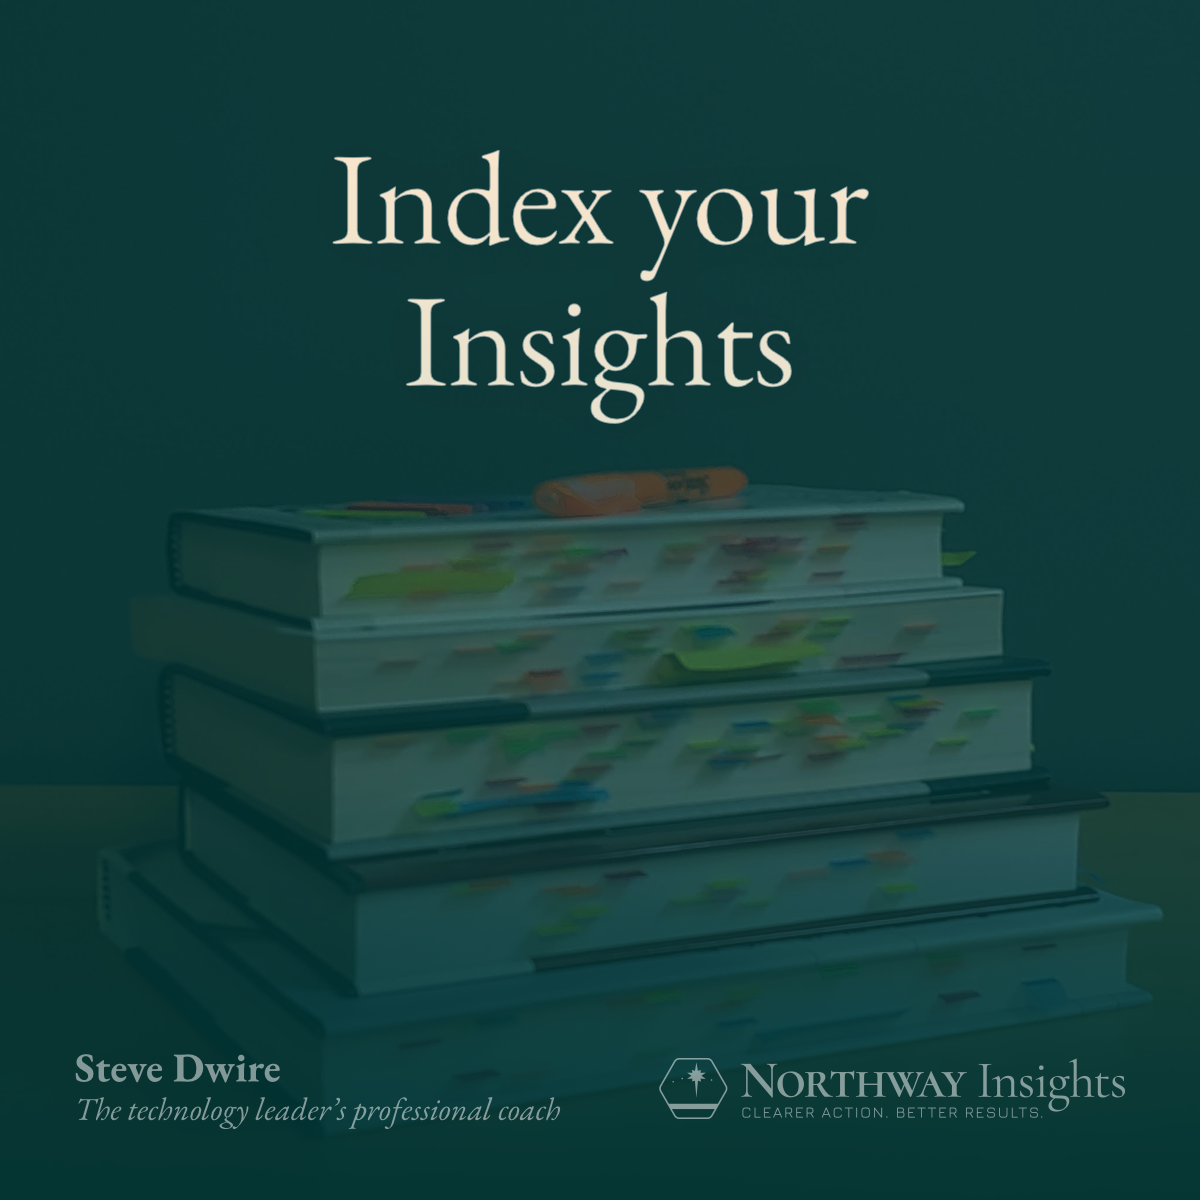 Index your Insights (background photo of a stack of books with sticky tags on the pages)